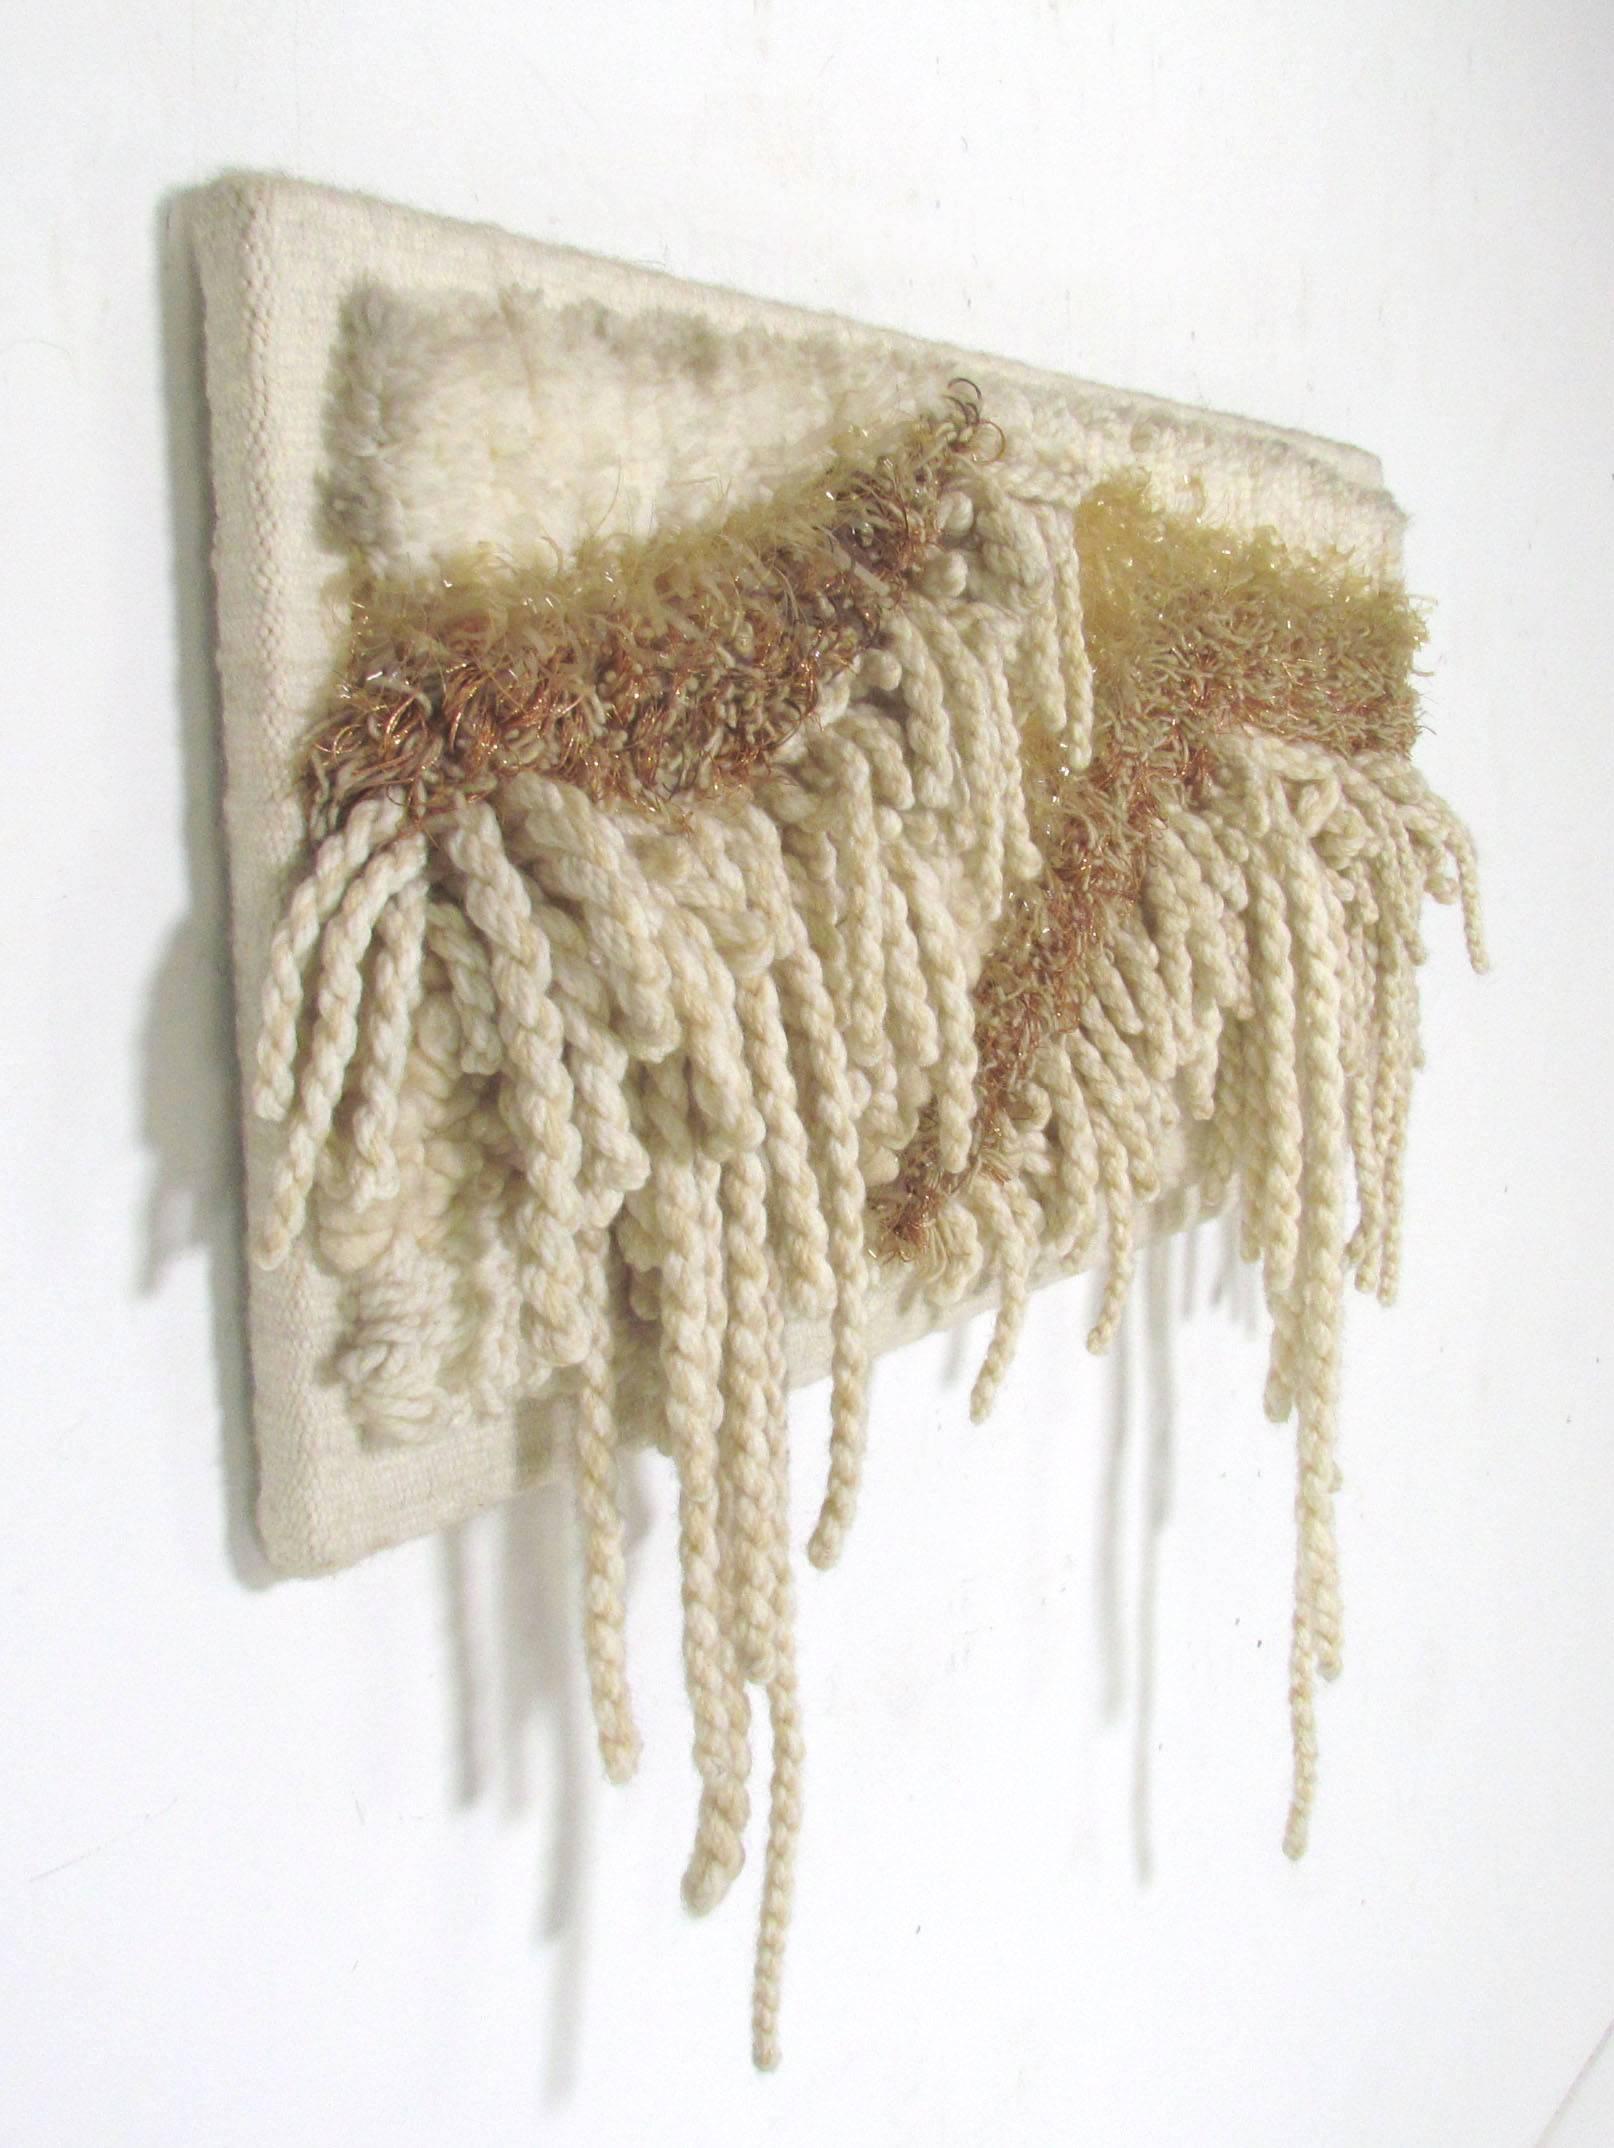 An abstract fiber art construction woven of wool, cotton, copper wire and cellophane, signed by the artist, circa 1970s.